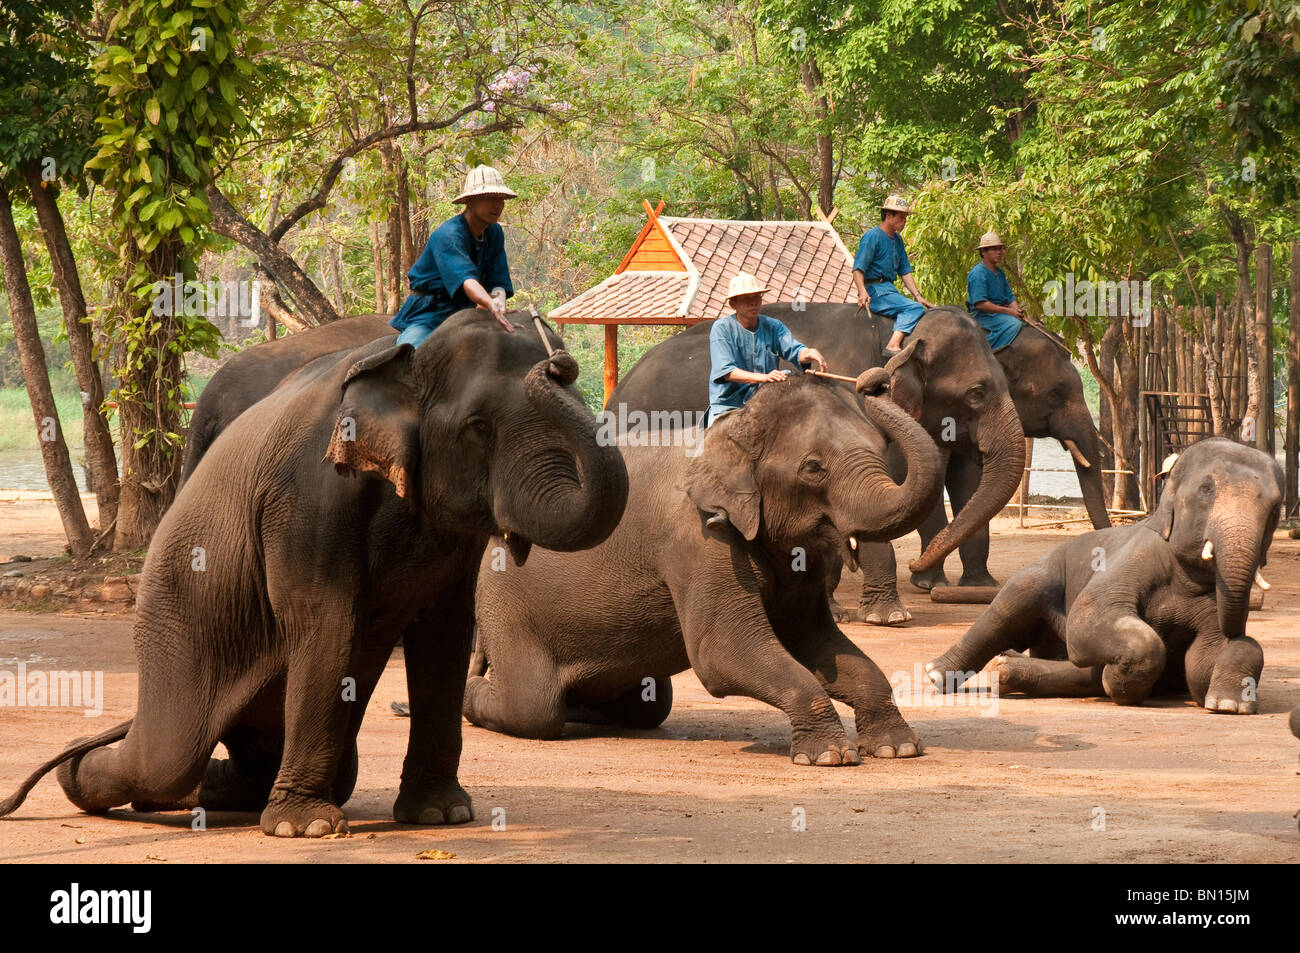 Elephants performing in show at the National Thai Elephant Conservation Center; Lampang, Chiang Mai Province, Thailand. Stock Photo